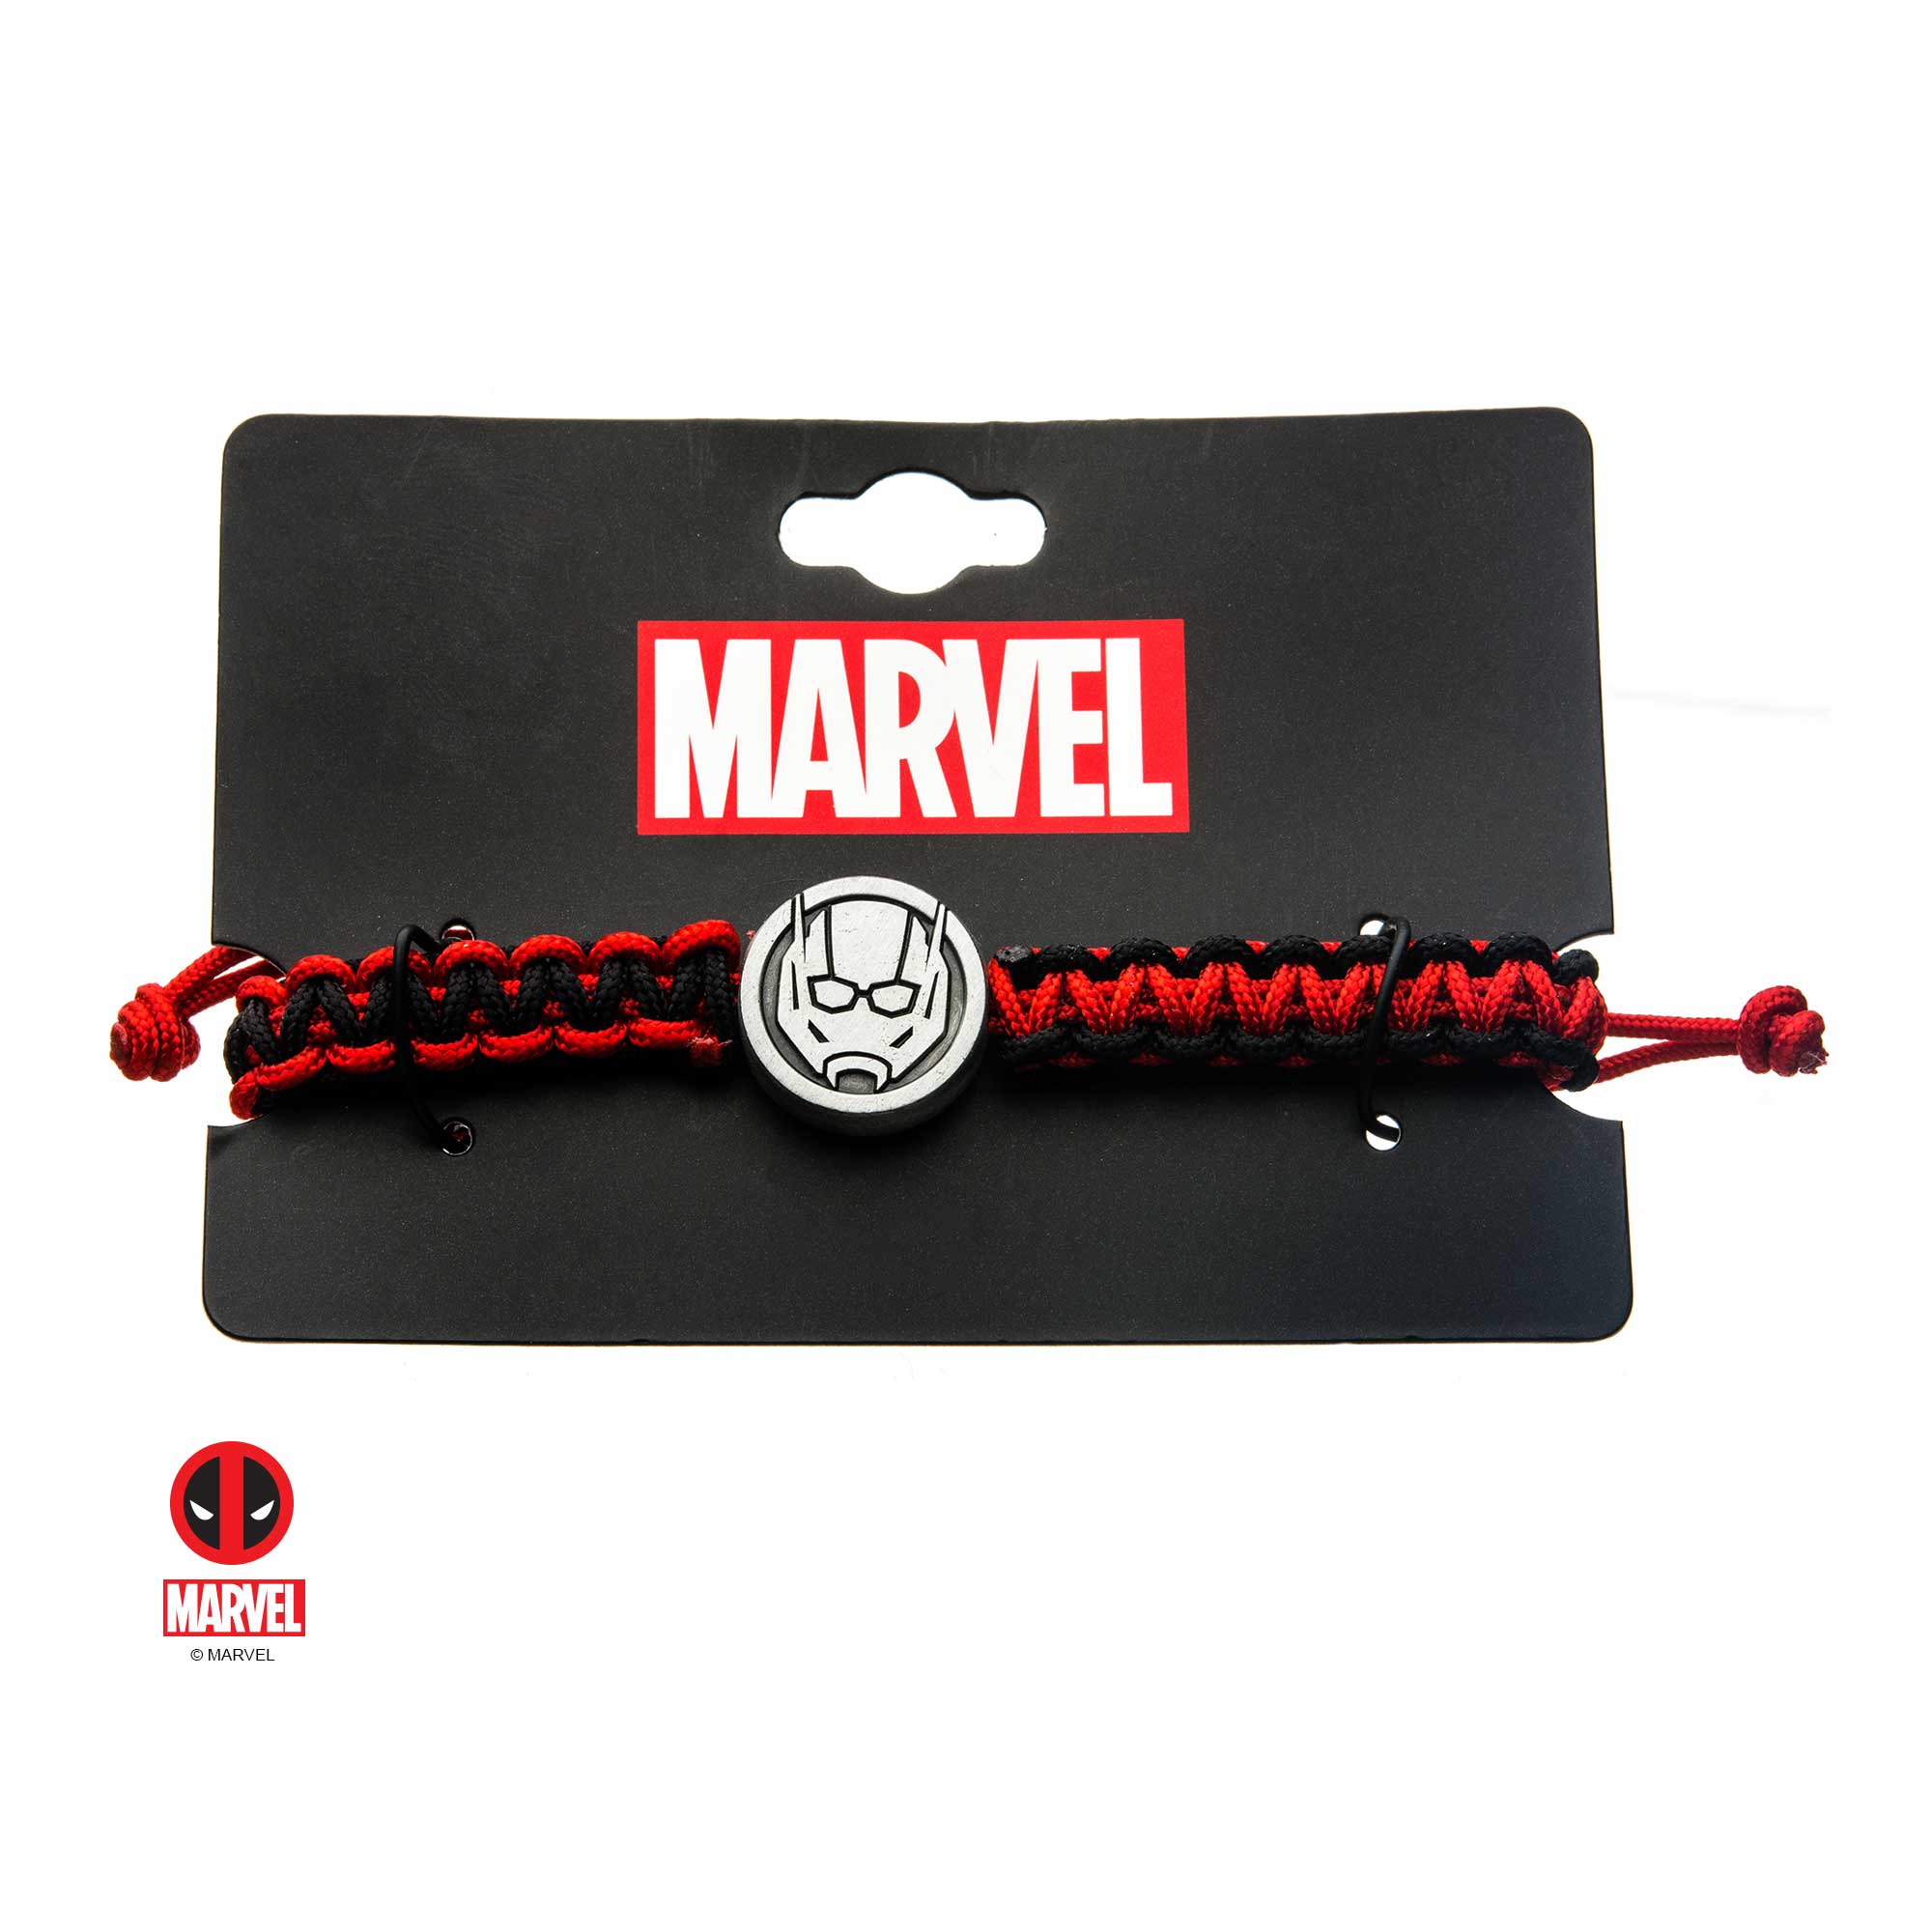 How to Make a Venom or Spider-Man Themed Paracord Survival Bracelet-Mad Max  Style Closure - YouTube